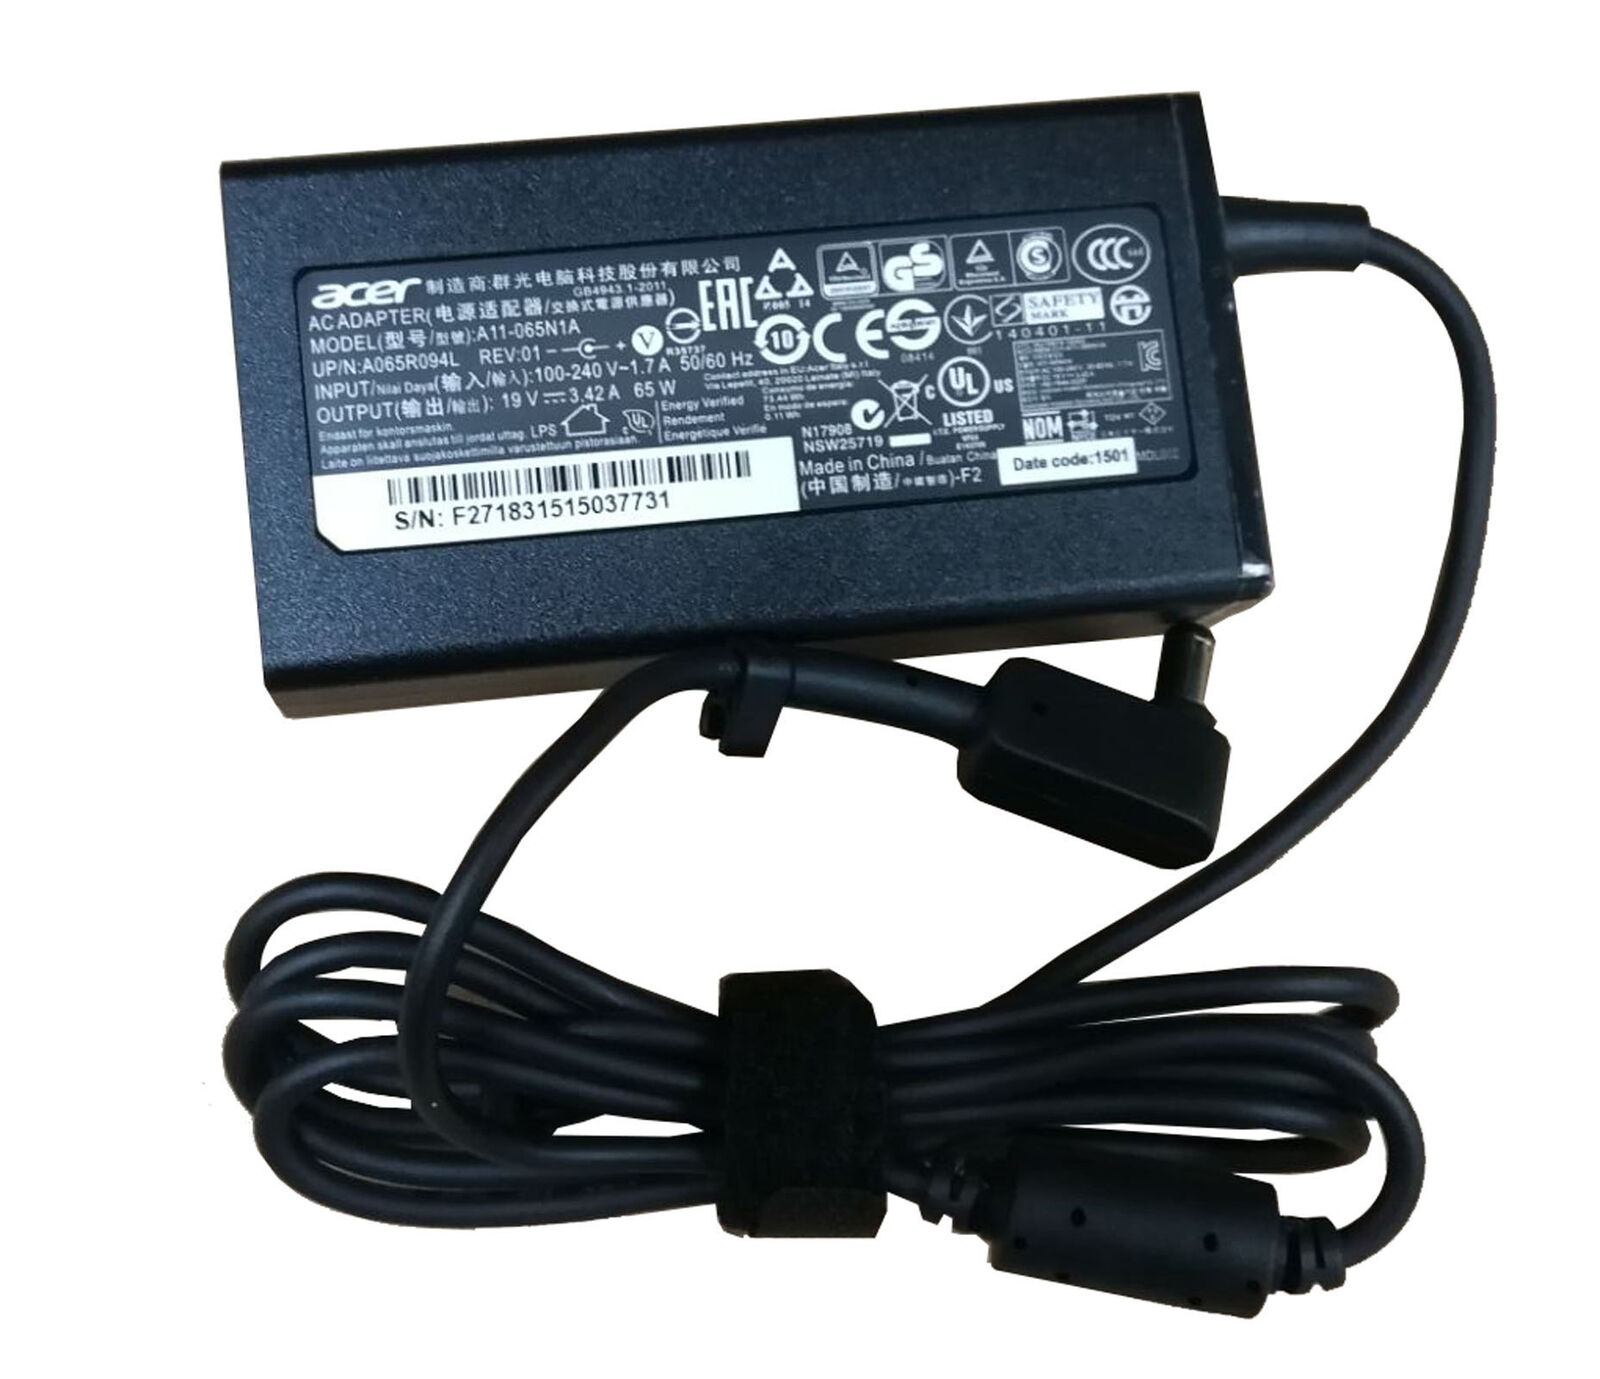 65W Acer Iconia Tab W700P-6821 Charger AC Adapter Power Cord